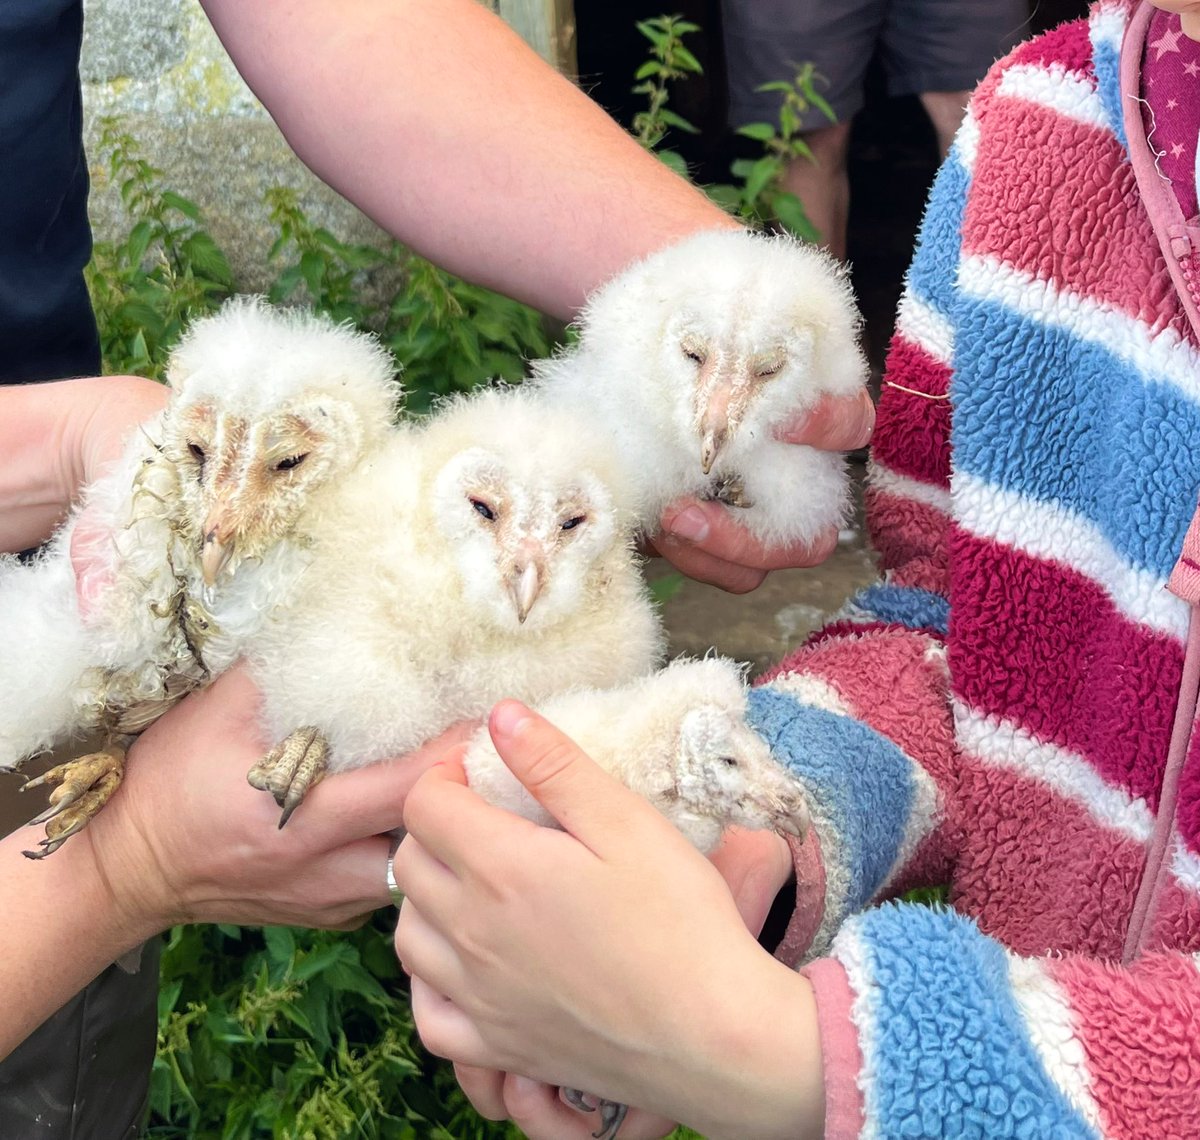 After an unsuccessful breeding season last year, we’re delighted to see the Barn Owls back in action with four chicks this year. Thanks to the @_BTO for their continued help in monitoring them 🙏🏽